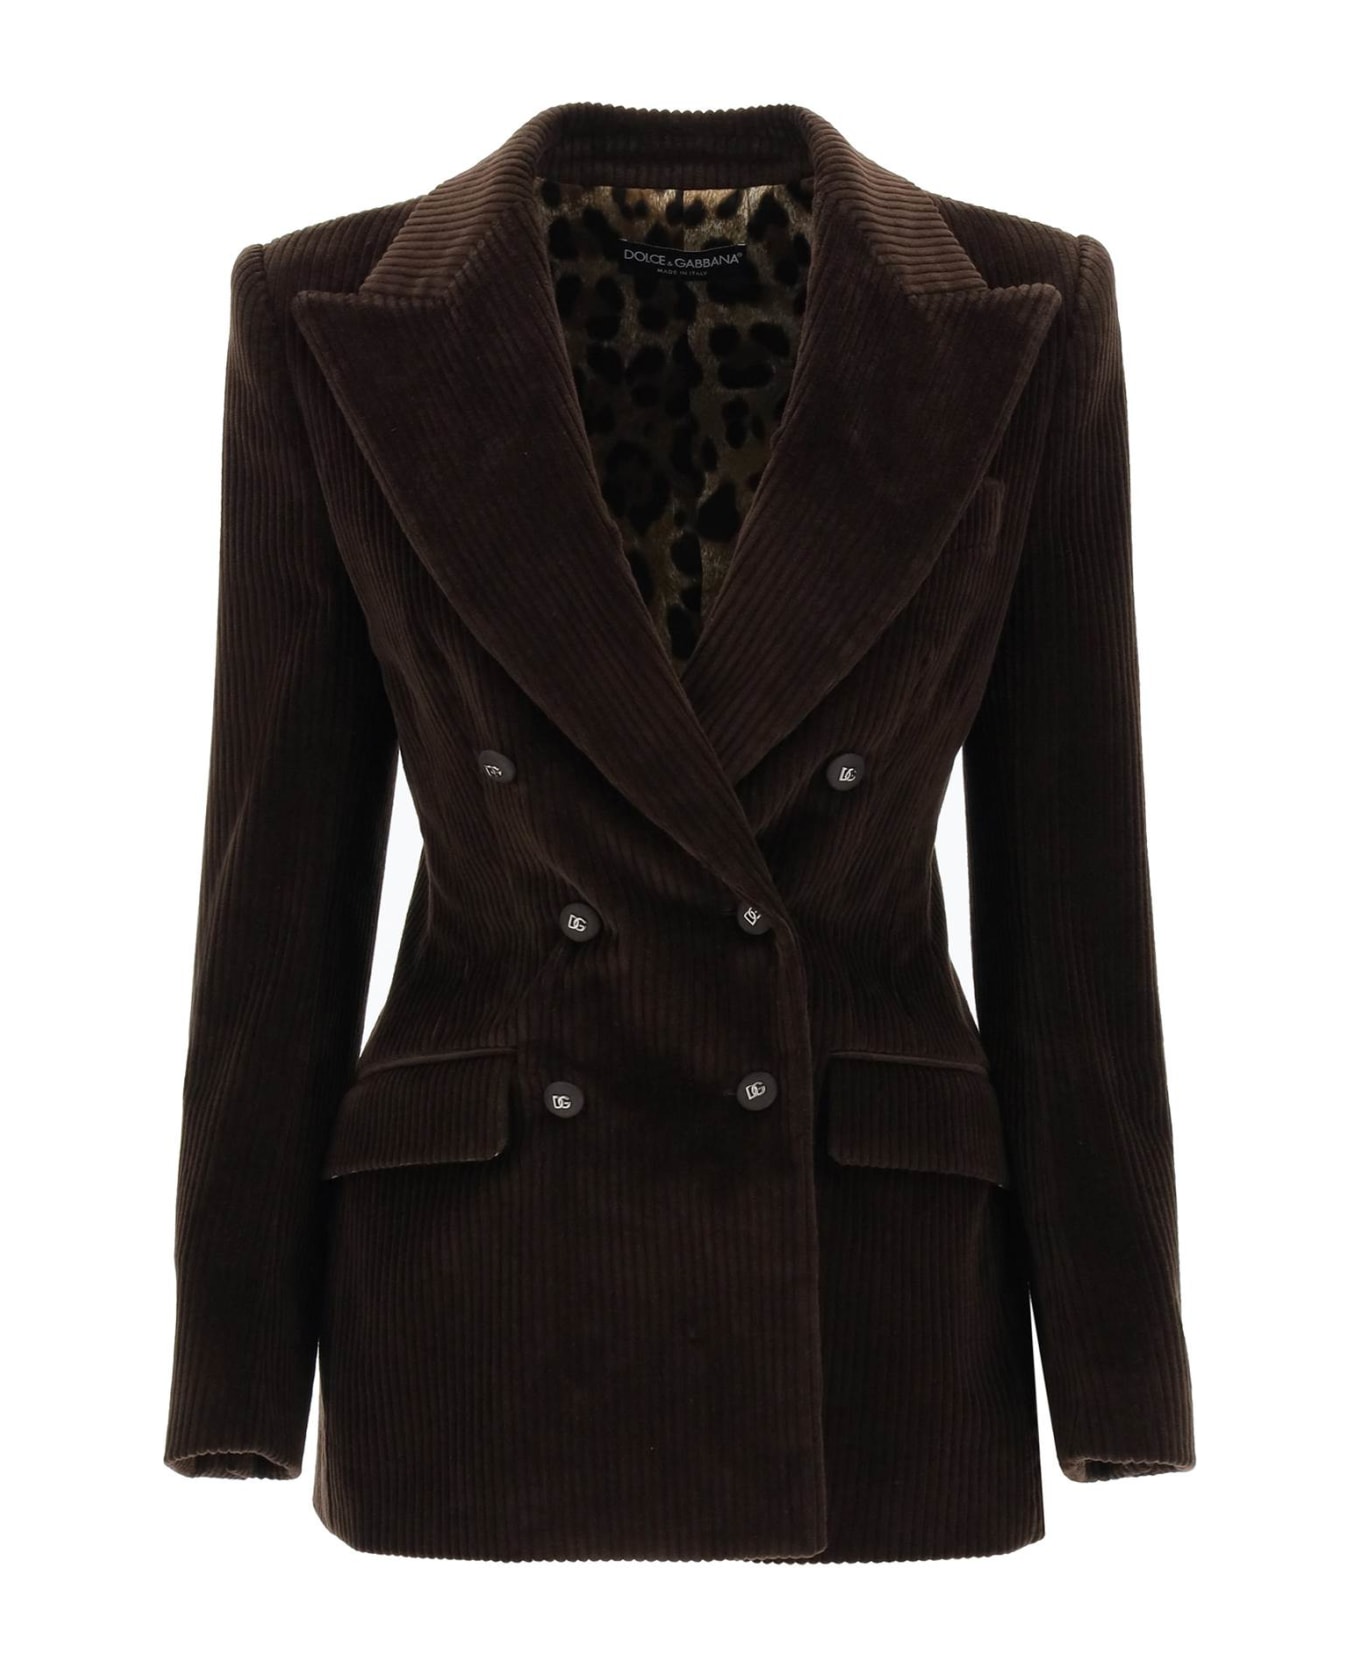 Dolce & Gabbana Double-breasted Corduroy Jacket - MARRONE SCURO 3 (Brown) ブレザー